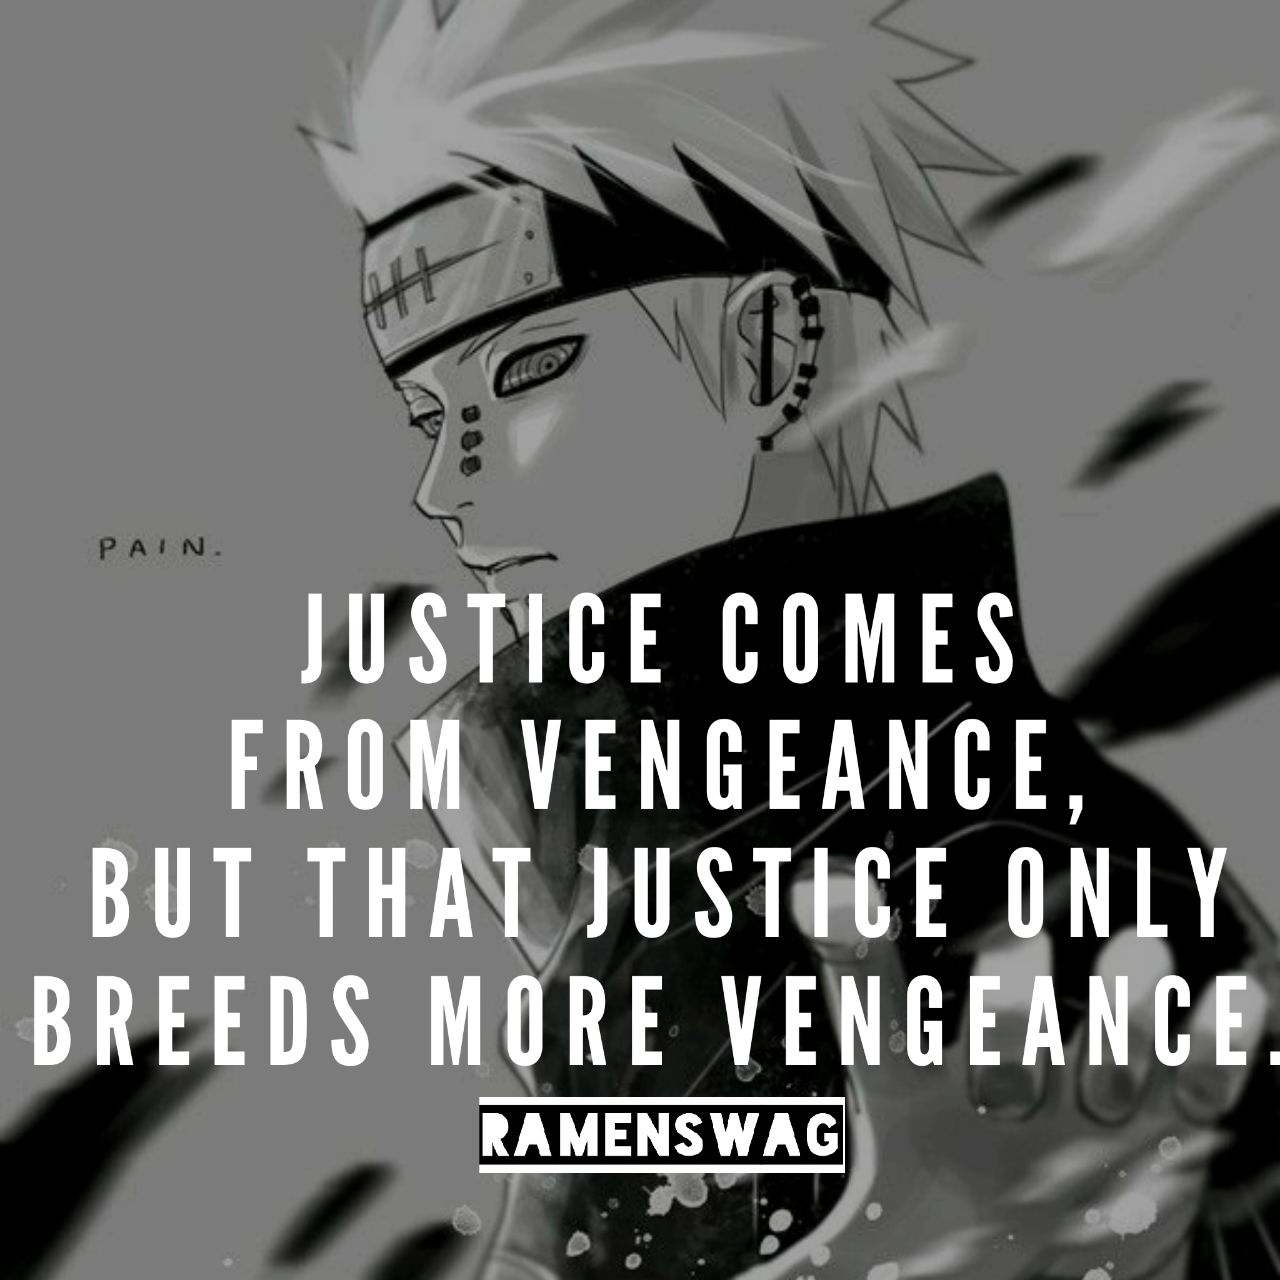 Pain Famous Quotes Naruto - 1280x1280 Wallpaper 